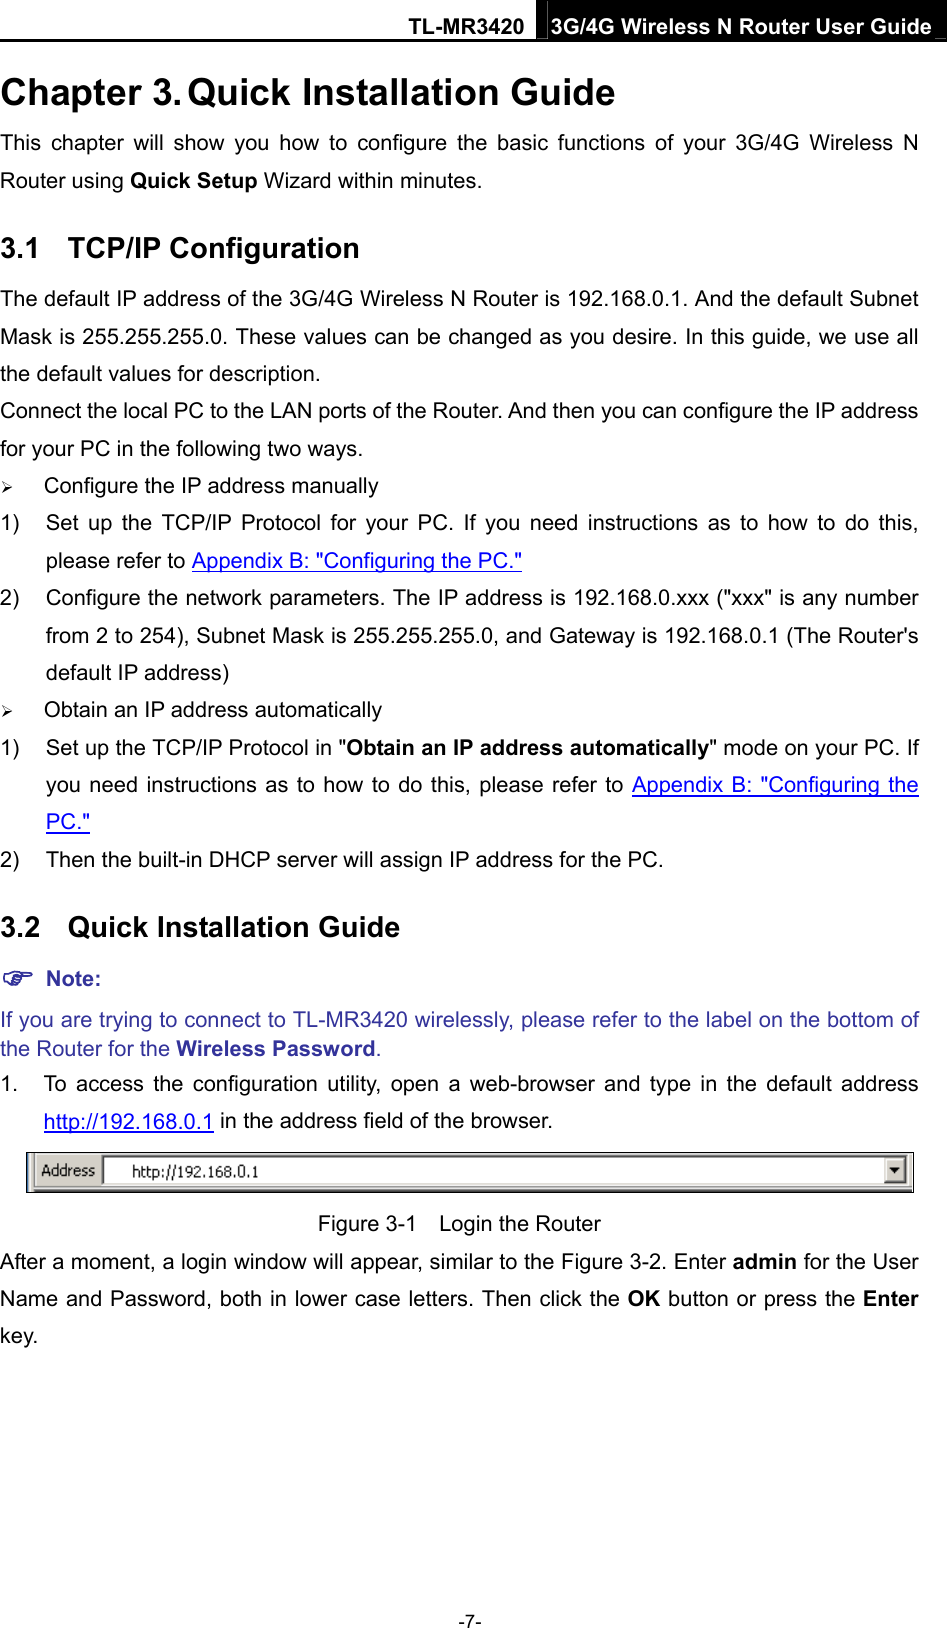 TL-MR3420 3G/4G Wireless N Router User Guide Chapter 3. Quick Installation Guide This chapter will show you how to configure the basic functions of your 3G/4G Wireless N Router using Quick Setup Wizard within minutes. 3.1  TCP/IP Configuration The default IP address of the 3G/4G Wireless N Router is 192.168.0.1. And the default Subnet Mask is 255.255.255.0. These values can be changed as you desire. In this guide, we use all the default values for description. Connect the local PC to the LAN ports of the Router. And then you can configure the IP address for your PC in the following two ways.  Configure the IP address manually 1)  Set up the TCP/IP Protocol for your PC. If you need instructions as to how to do this, please refer to Appendix B: &quot;Configuring the PC.&quot; 2)  Configure the network parameters. The IP address is 192.168.0.xxx (&quot;xxx&quot; is any number from 2 to 254), Subnet Mask is 255.255.255.0, and Gateway is 192.168.0.1 (The Router&apos;s default IP address)  Obtain an IP address automatically 1)  Set up the TCP/IP Protocol in &quot;Obtain an IP address automatically&quot; mode on your PC. If you need instructions as to how to do this, please refer to Appendix B: &quot;Configuring the PC.&quot; 2)  Then the built-in DHCP server will assign IP address for the PC. 3.2  Quick Installation Guide  Note: If you are trying to connect to TL-MR3420 wirelessly, please refer to the label on the bottom of the Router for the Wireless Password. 1.  To access the configuration utility, open a web-browser and type in the default address http://192.168.0.1 in the address field of the browser.  Figure 3-1    Login the Router After a moment, a login window will appear, similar to the Figure 3-2. Enter admin for the User Name and Password, both in lower case letters. Then click the OK button or press the Enter key. -7- 